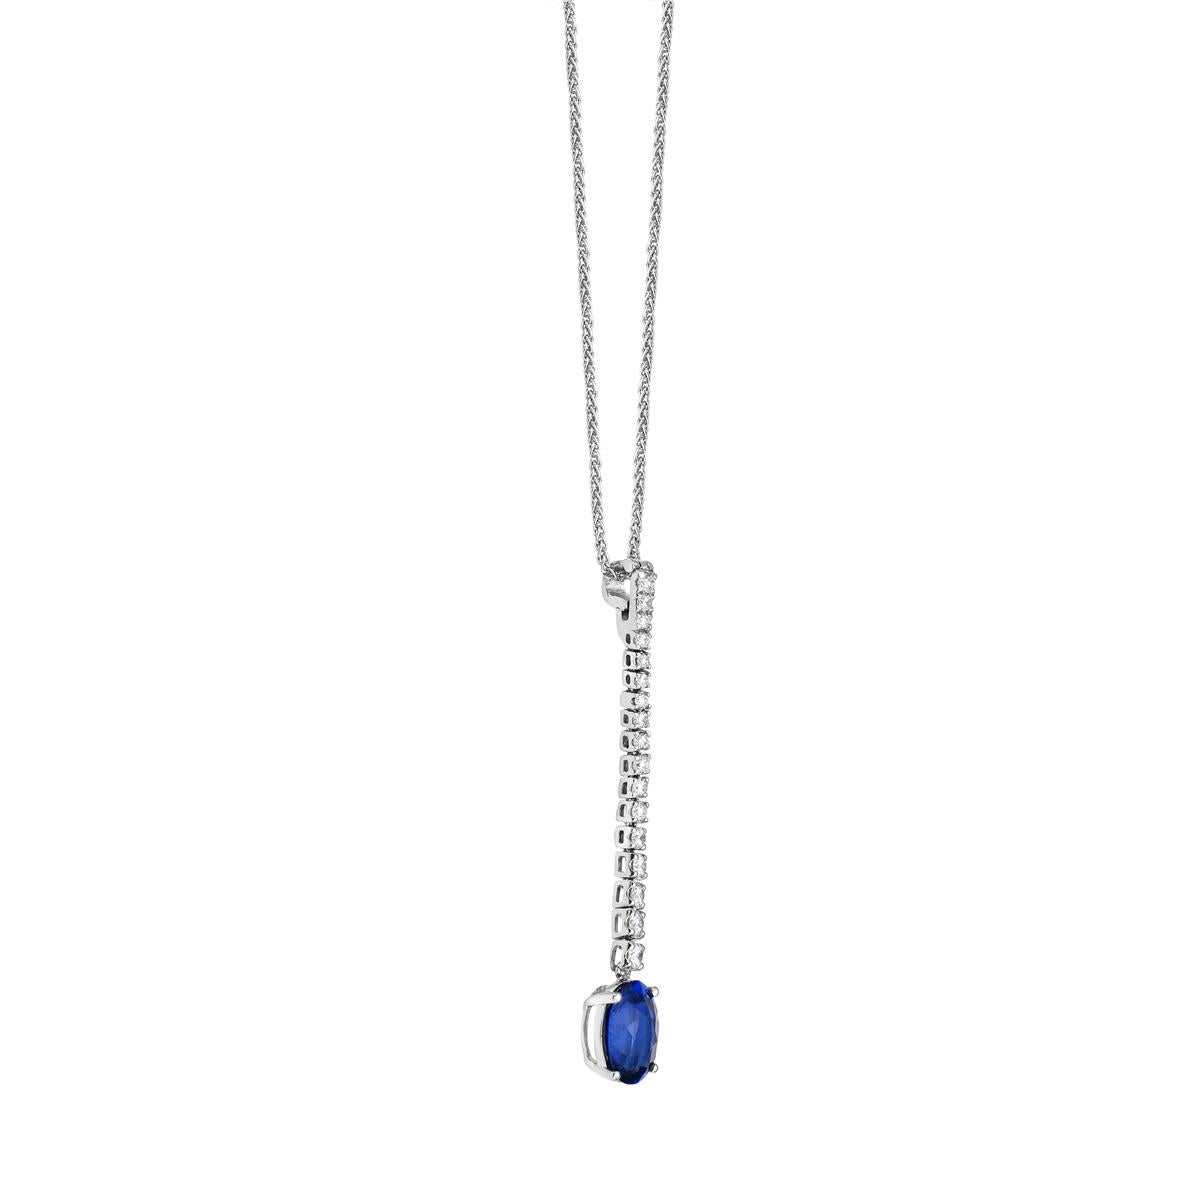 With this diamond and sapphire oval-shaped necklace, style and glamour are in the spotlight. This 18-karat diamond and sapphire oval-shaped necklace is made from 2.1 grams of gold. This necklace is adorned with VS2, G color diamonds, made out of 17